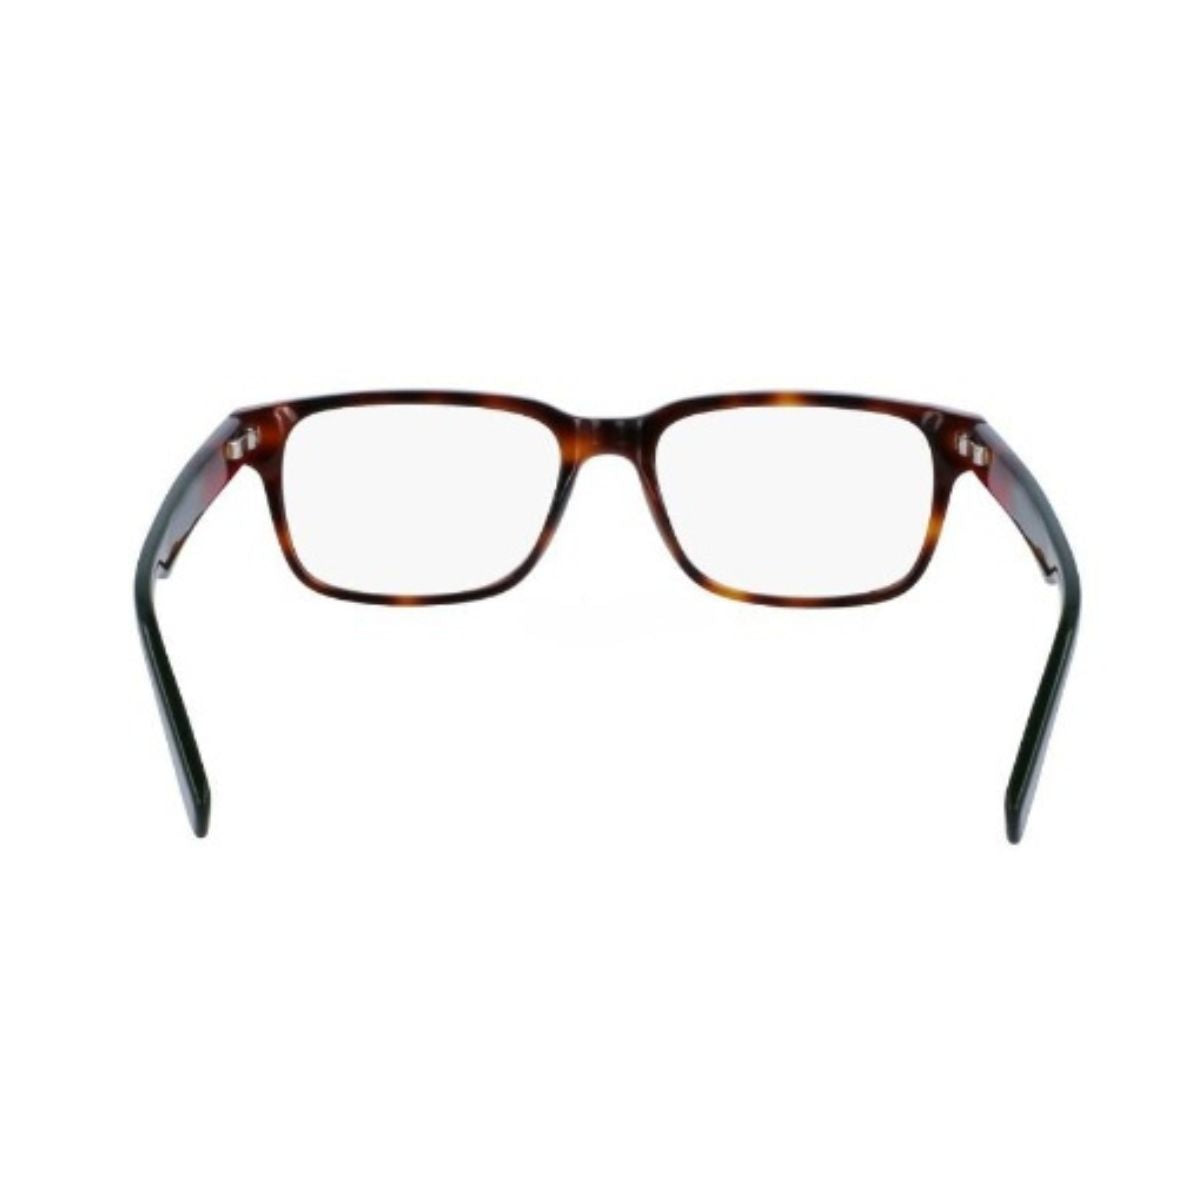 "Lacoste 2910 240 glasses frame for men and women online at optorium"